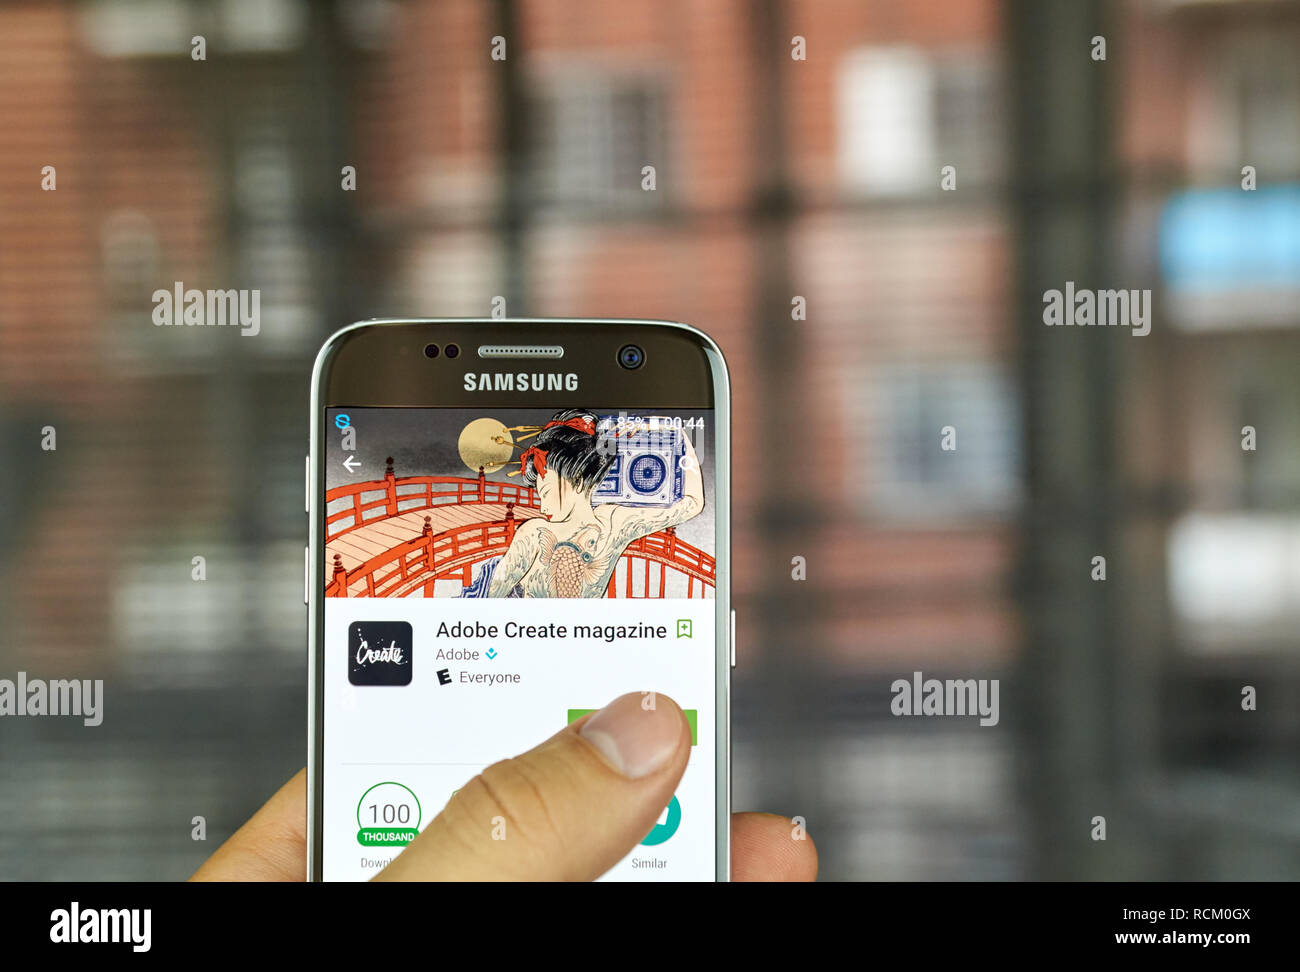 MONTREAL, CANADA - JULY, 15 : Adobe Create Magazine app on Samsung s7 screen. It's a free app that contains original content geared toward informing,  Stock Photo